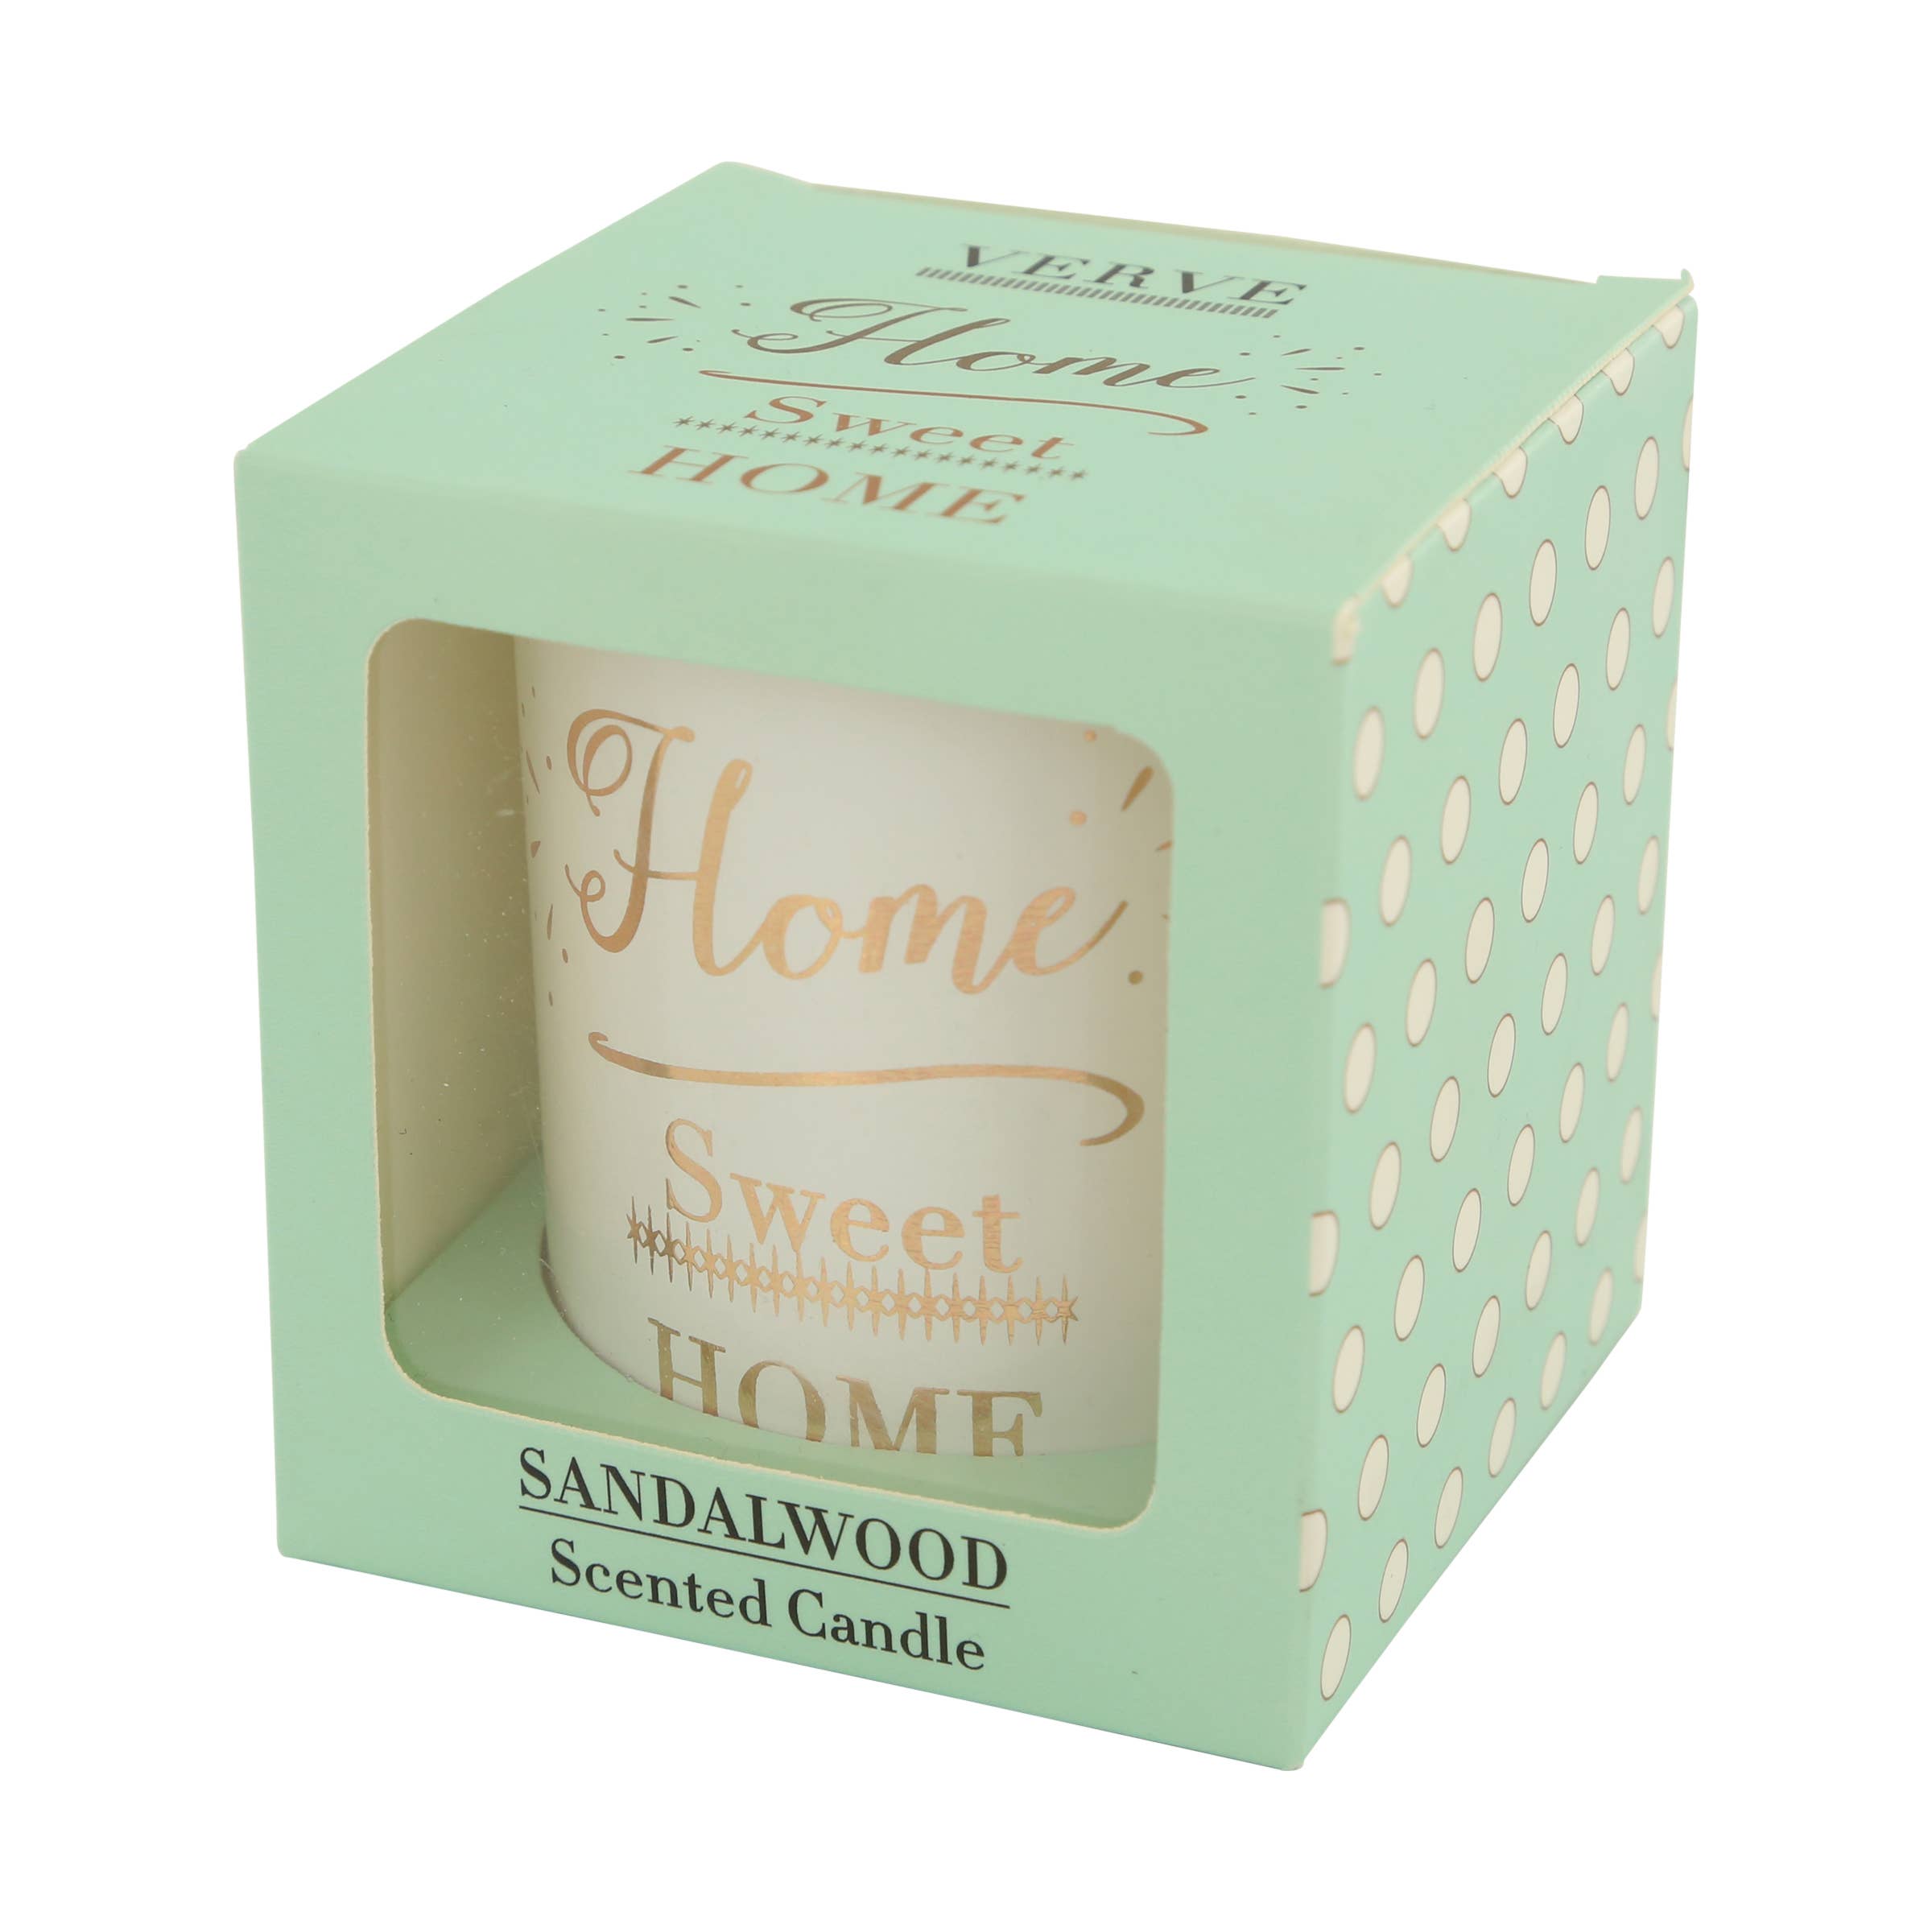 HOME SWEET HOME SANDLEWOOD CANDLE IN BOX by Verve